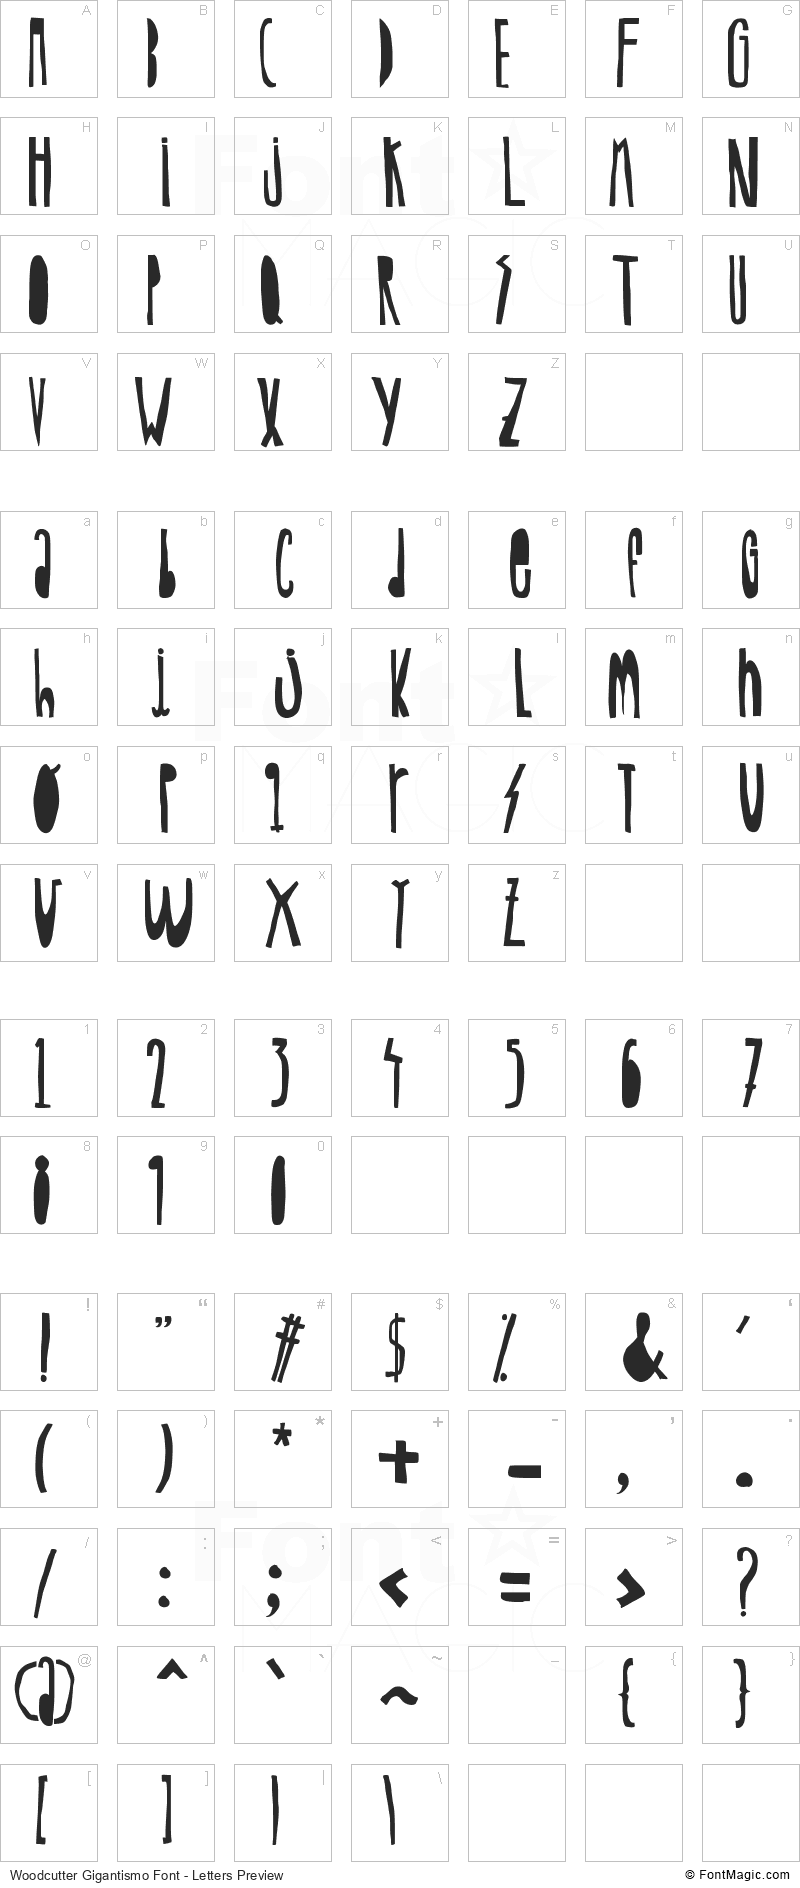 Woodcutter Gigantismo Font - All Latters Preview Chart